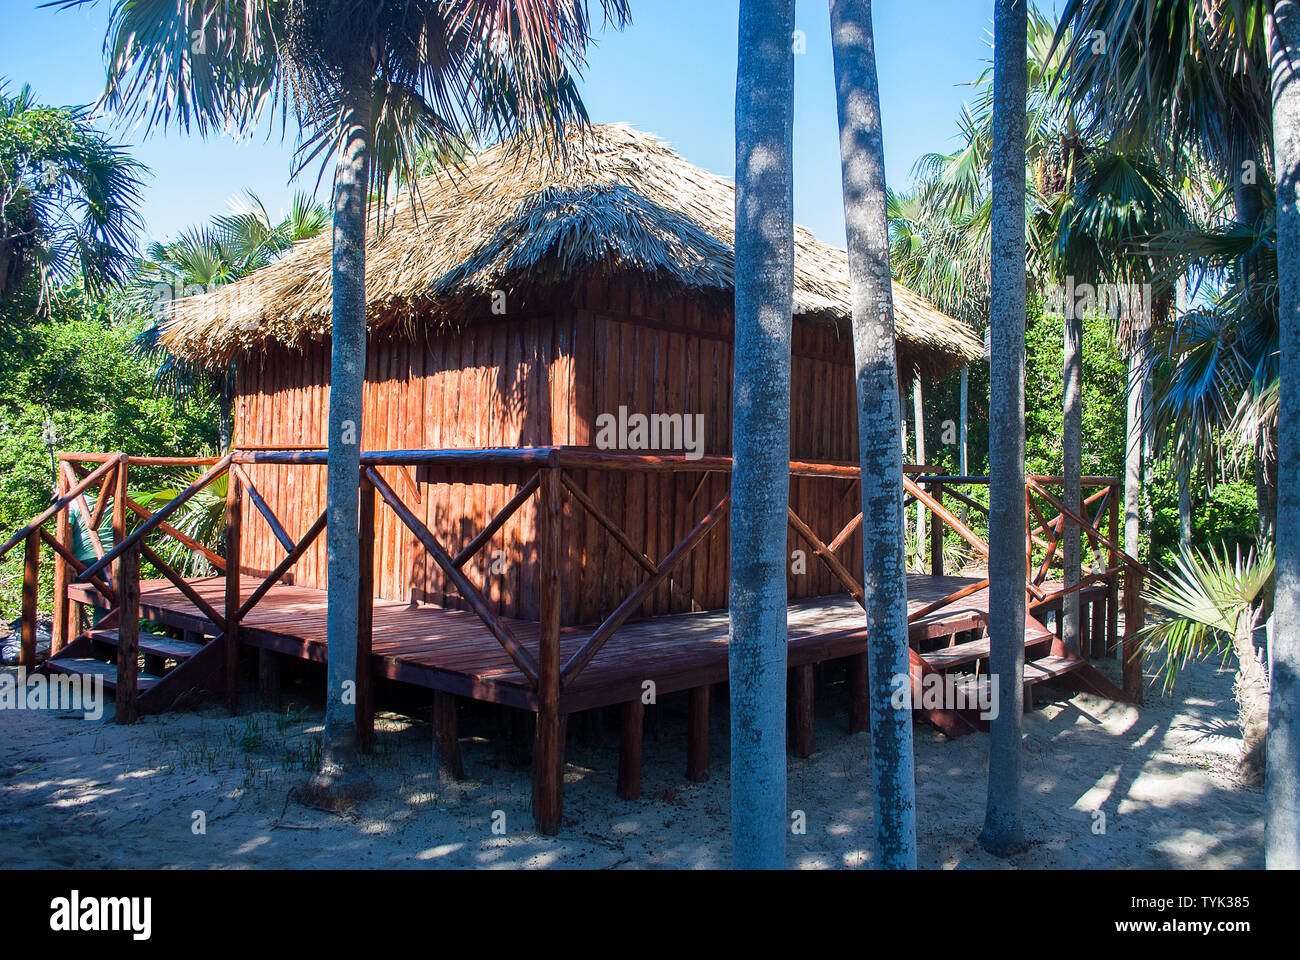 Closed beach bar hut made of palm trees on the white sand Stock Photo